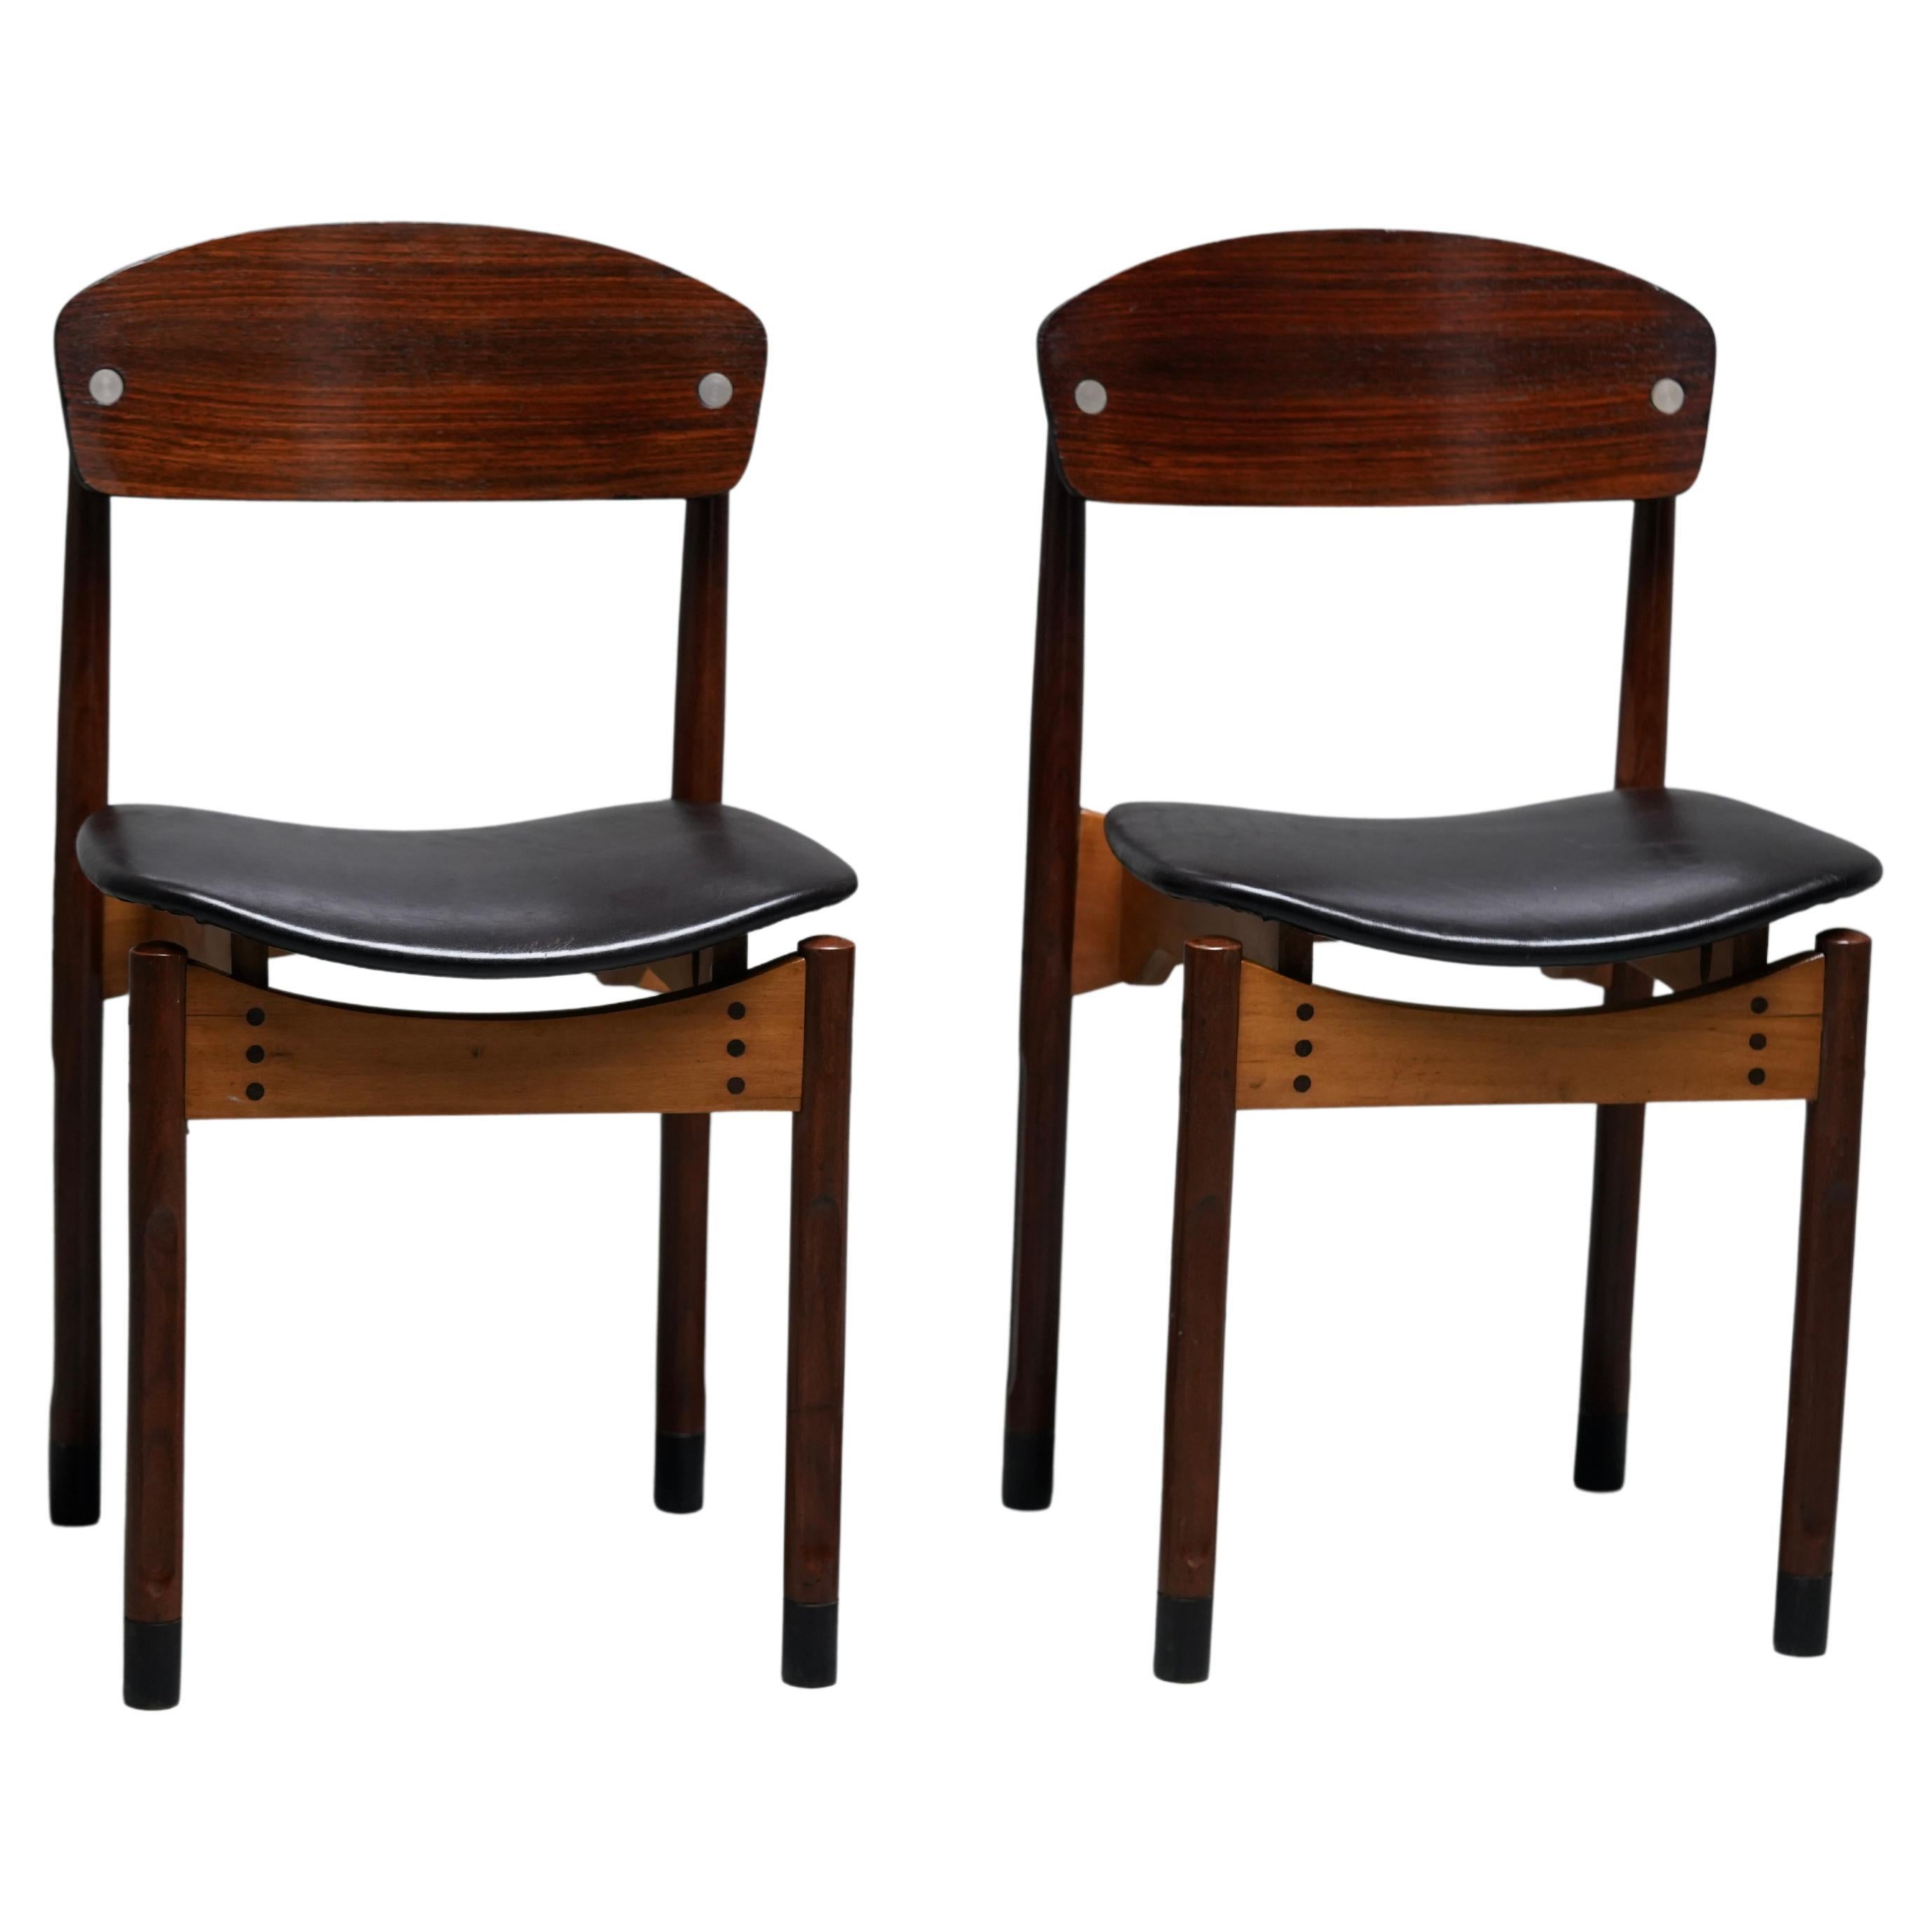 Set of 2 Diningroom Chairs in Teak, Mahogany and faux leather, Italty, 1960's